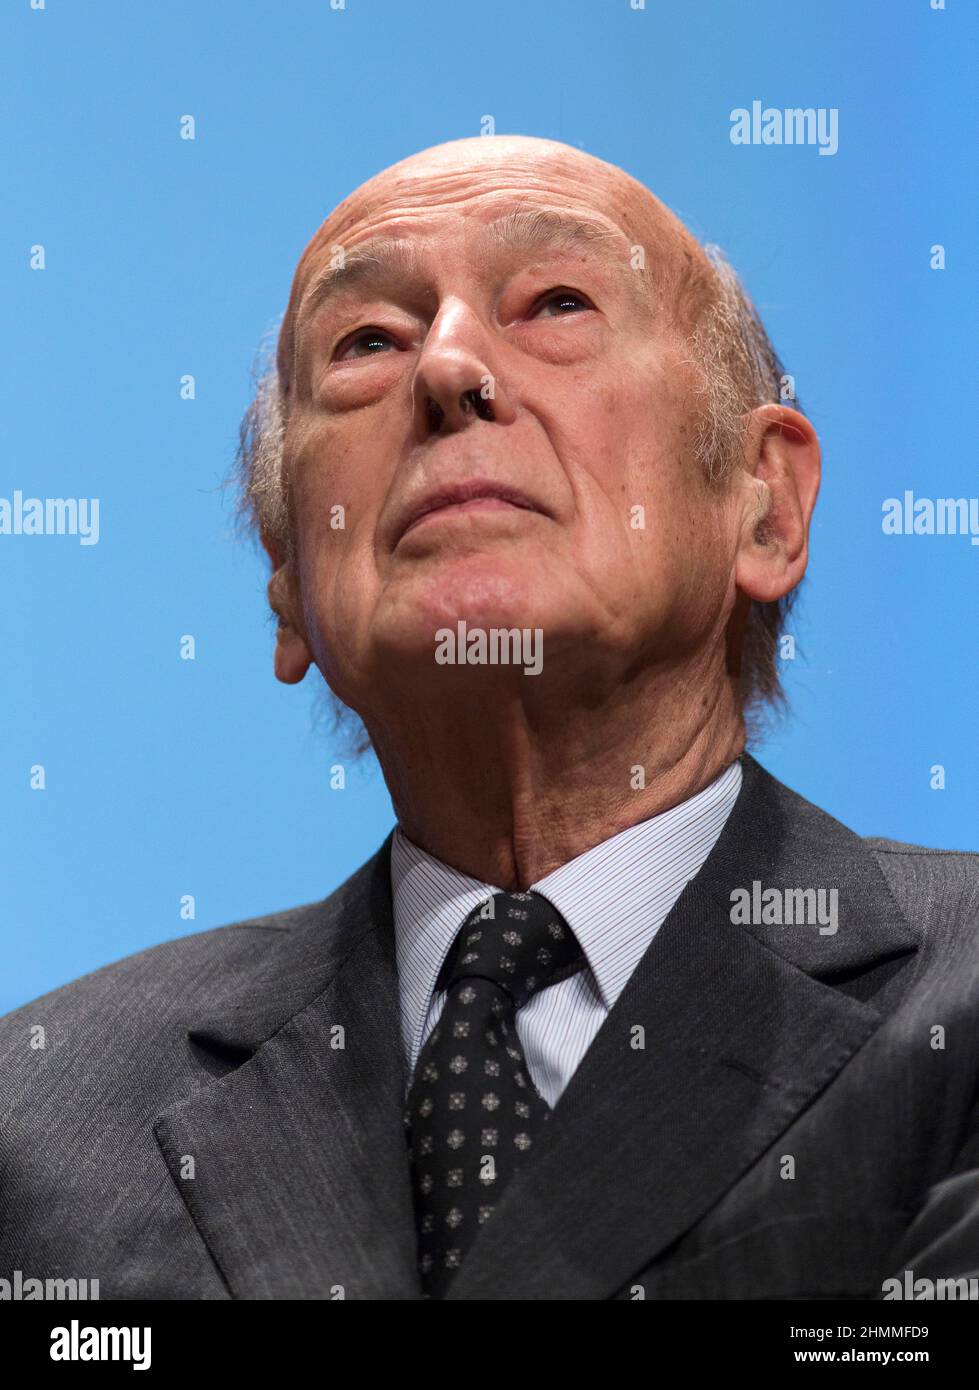 Belgium, Brussels, on October 10, 2013: ÒReinvent EuropeÓ, an event organized by the magazine Le Nouvel Observateur, with Valery Giscard d'Estaing, former President of the French Republic Stock Photo